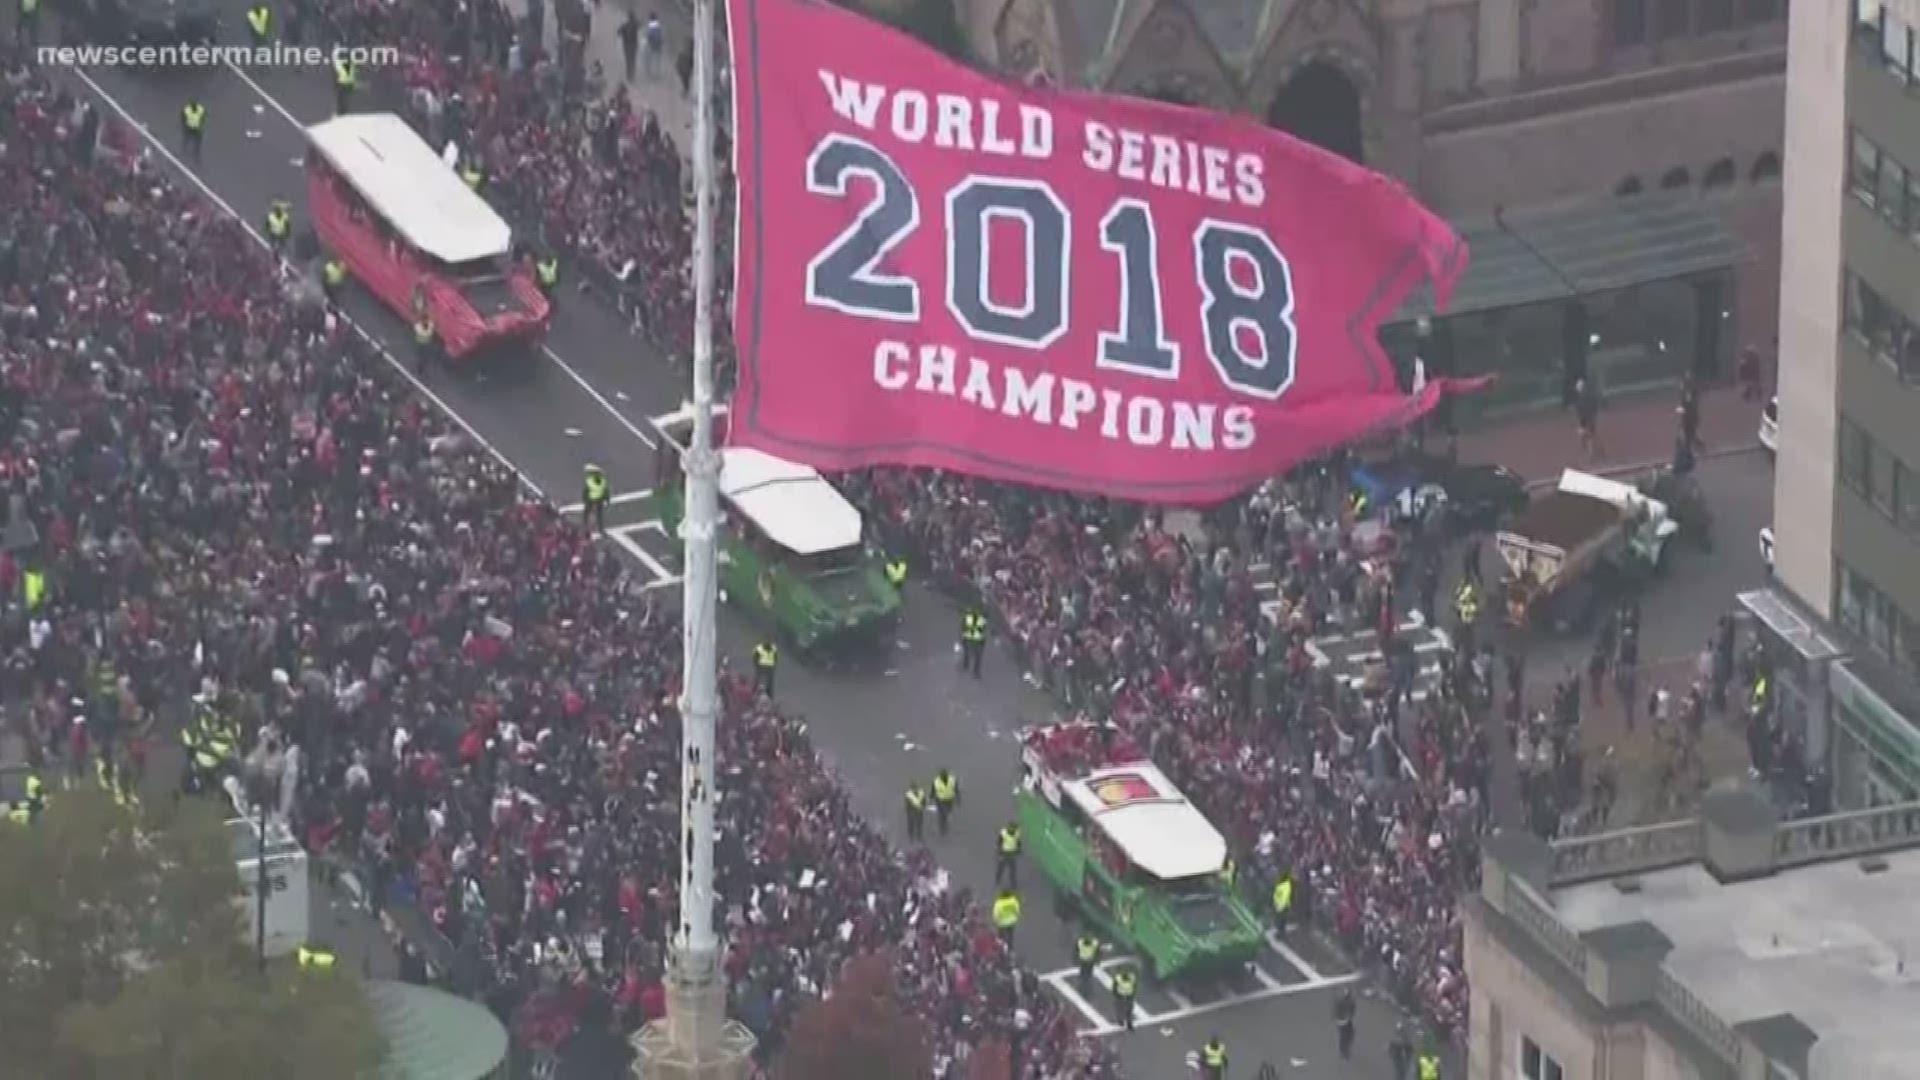 Four championships in 15 years and Red Sox fans still can't get enough as evinced by the outpouring of joy at the team's 2018 World Series victory parade through Boston